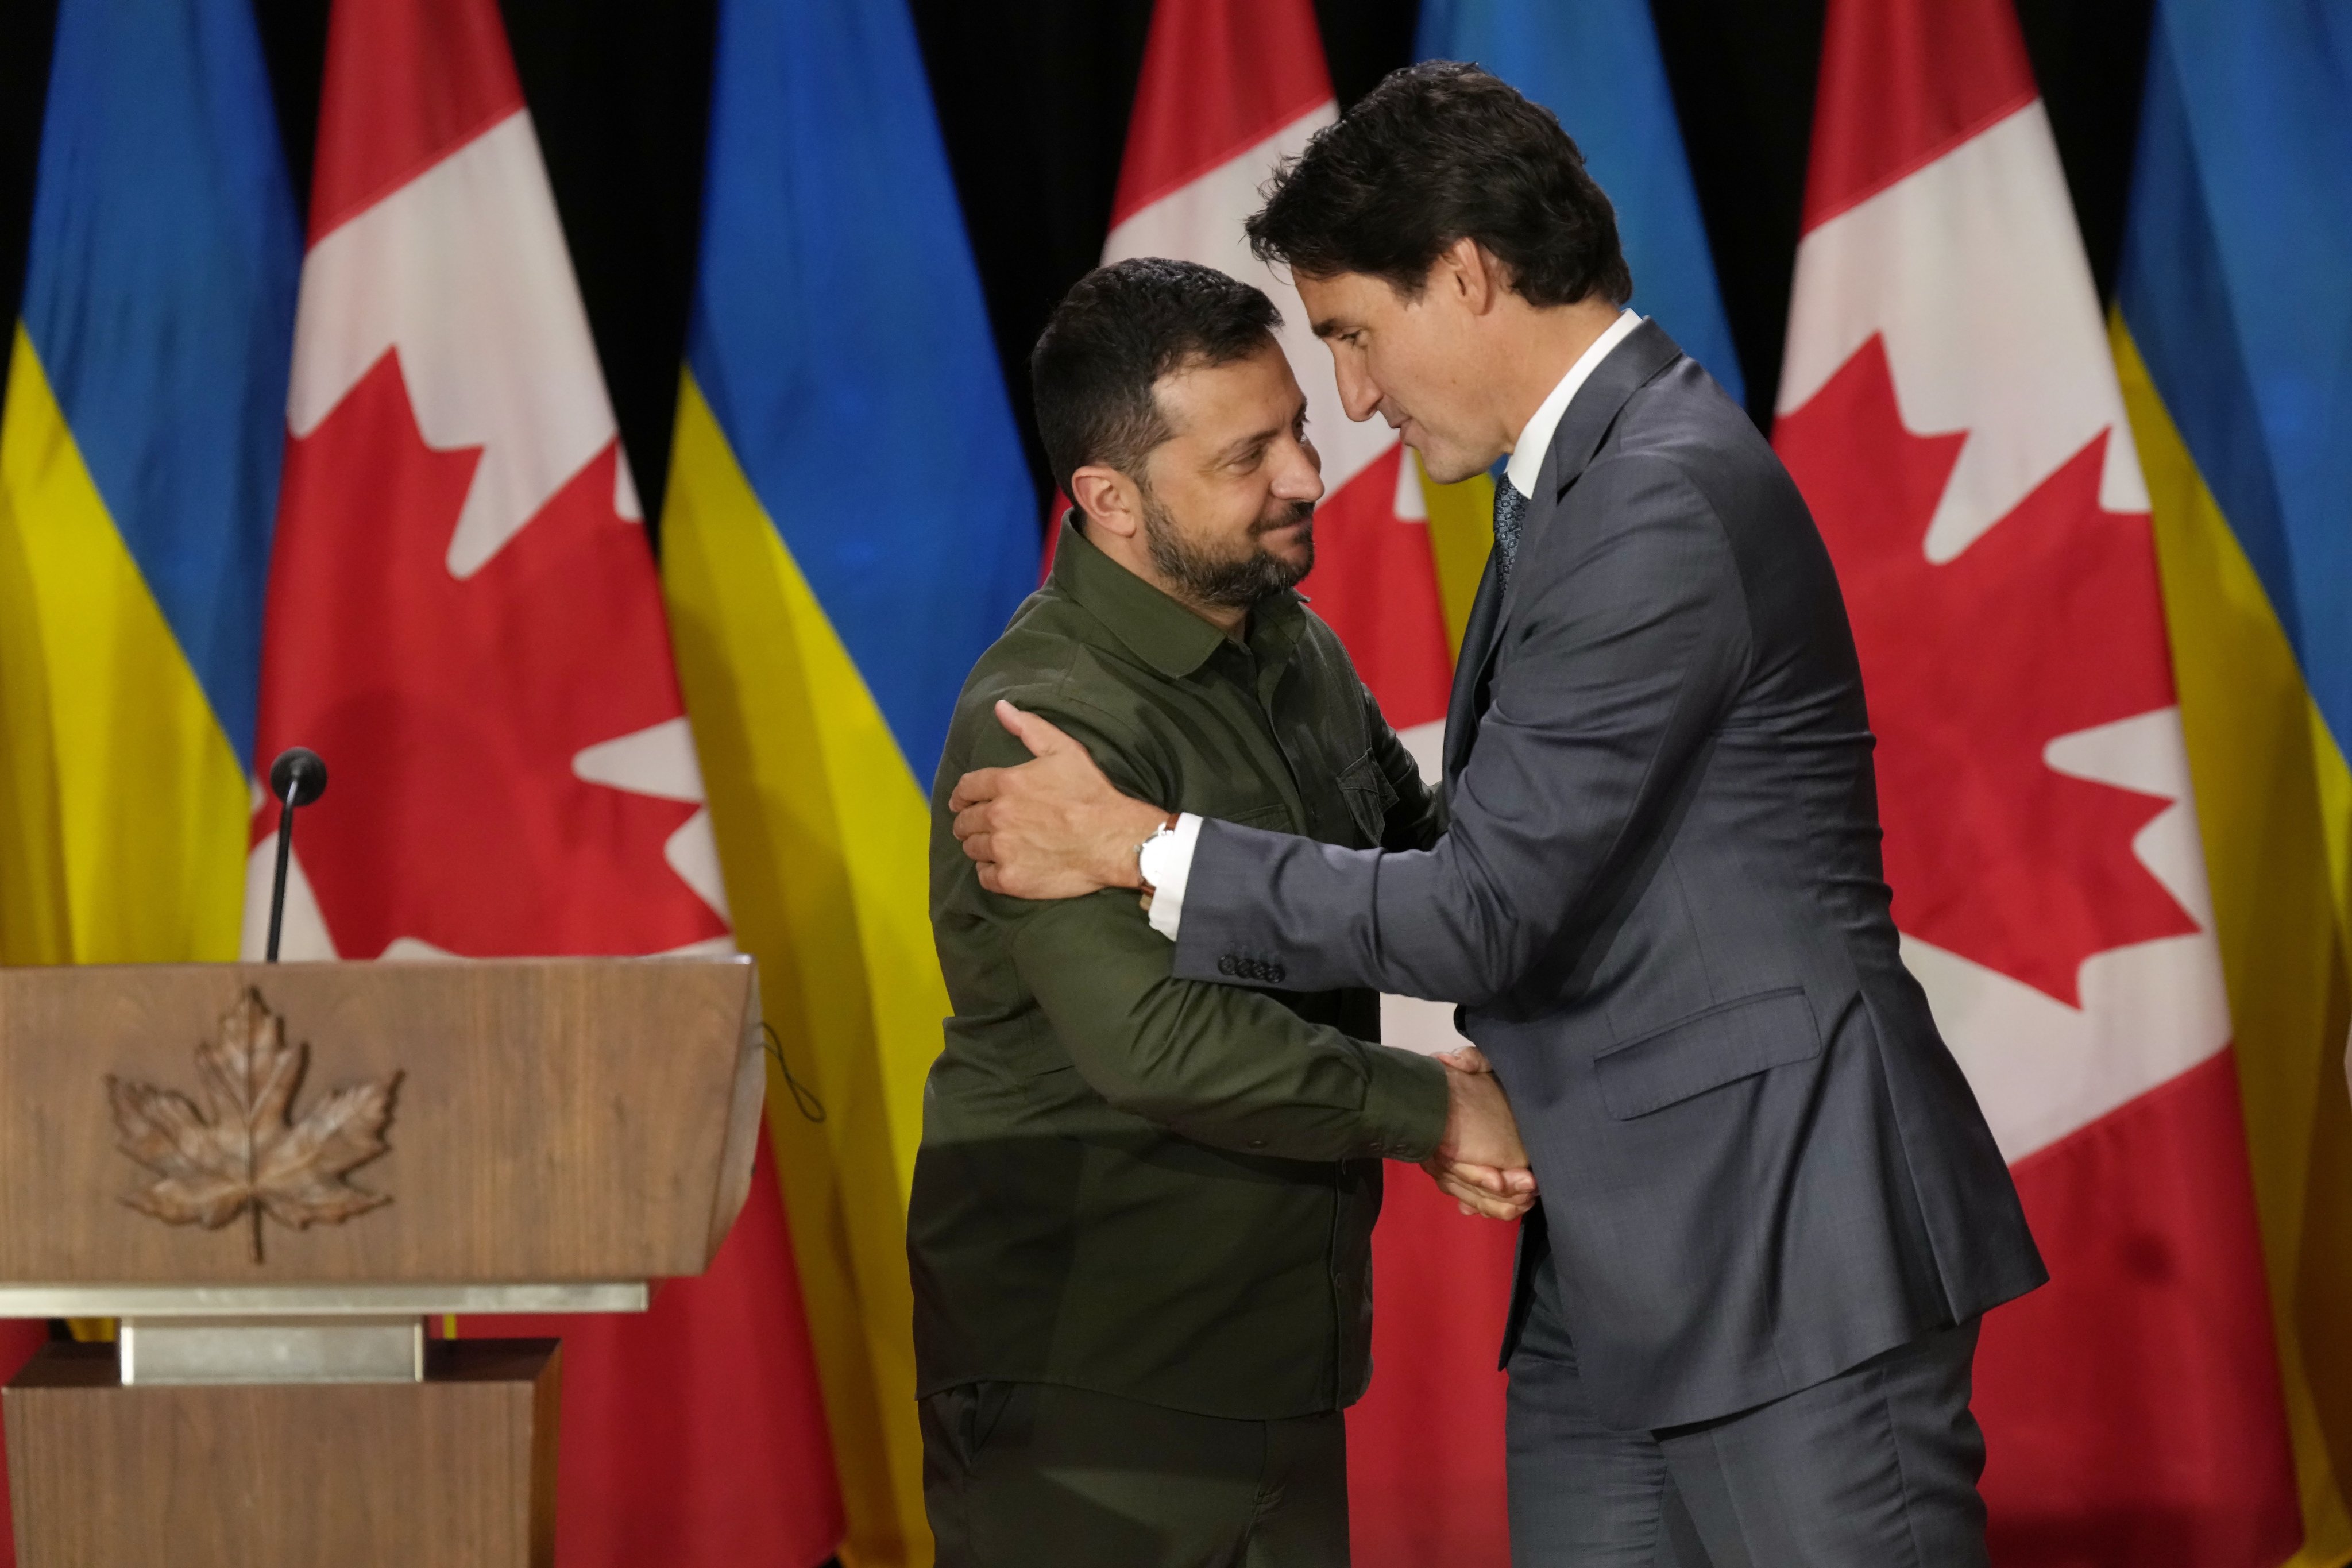 Ukraine’s President Volodymyr Zelensky and Canada’s Prime Minister Justin Trudeau shake hands at a joint press conference in Ottawa on Friday. Photo: Canadian Press via AP